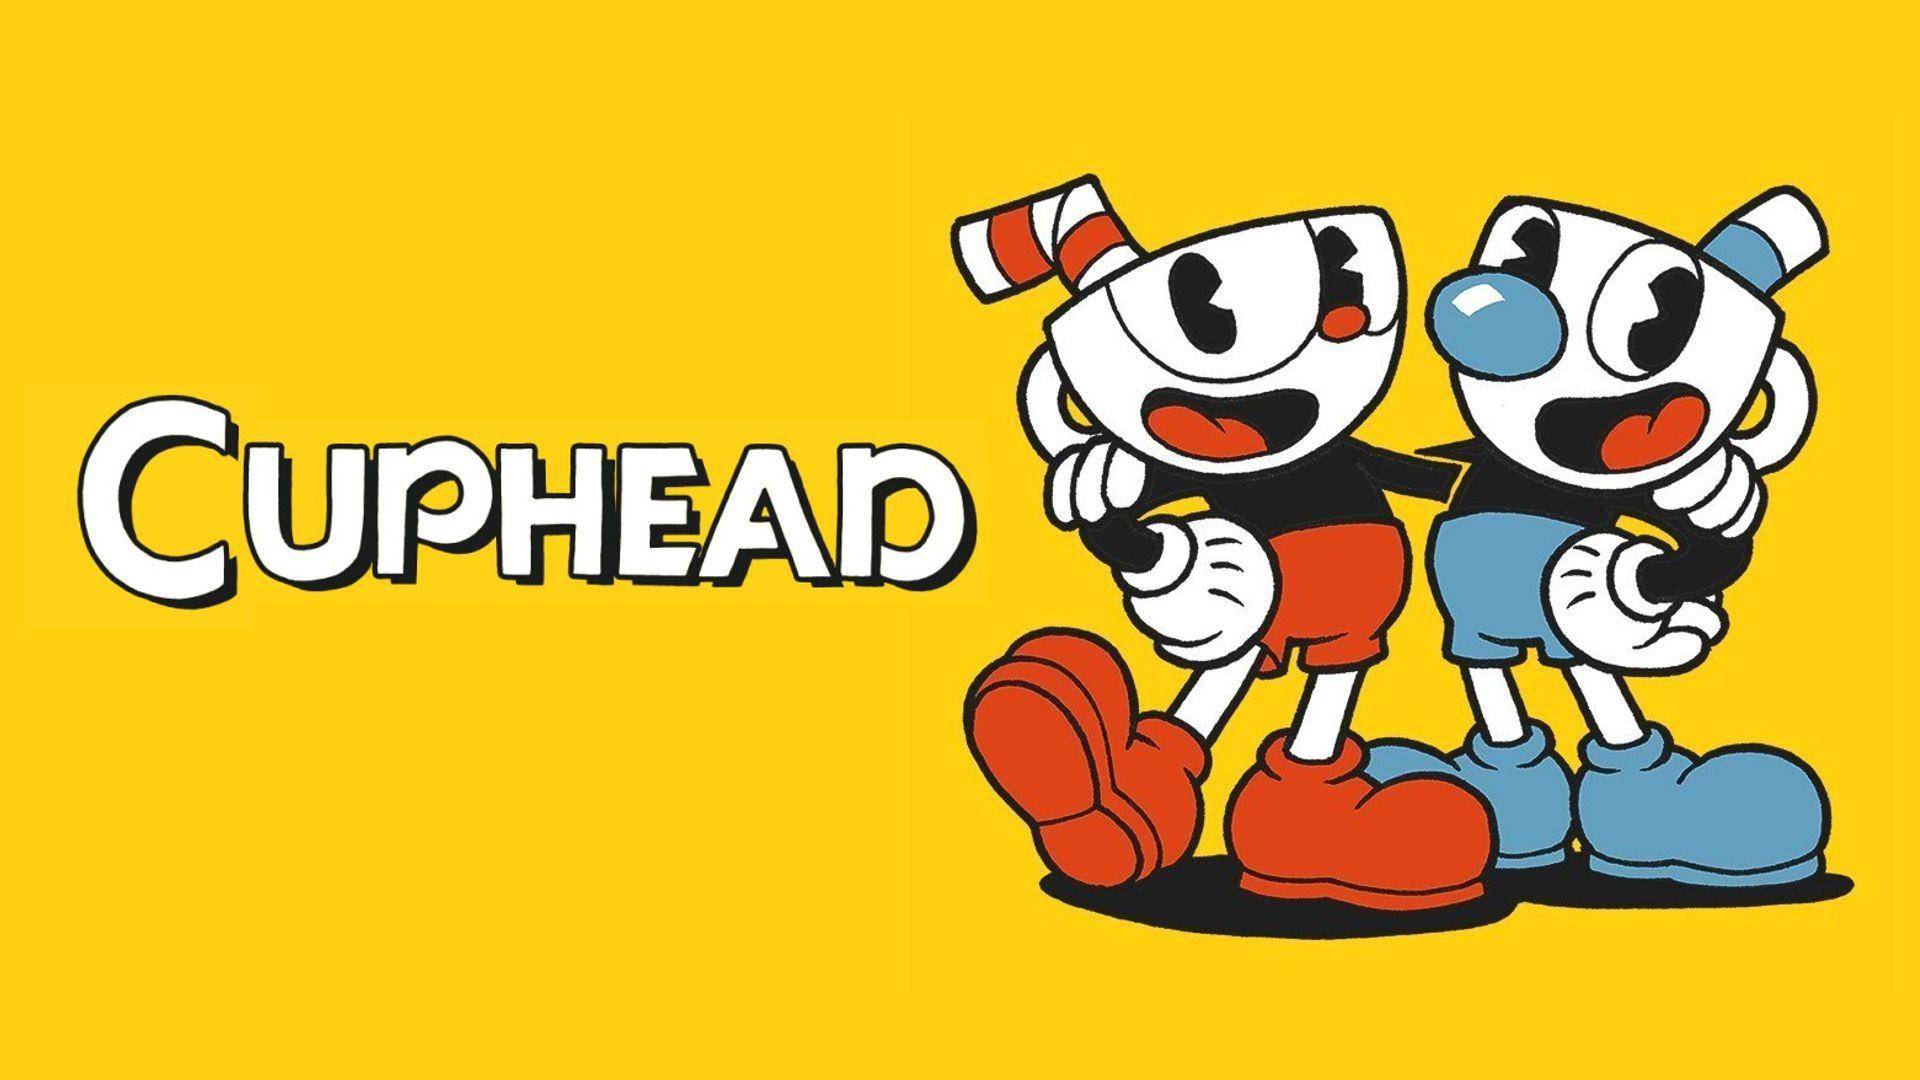 Cuphead's DLC has been delayed again